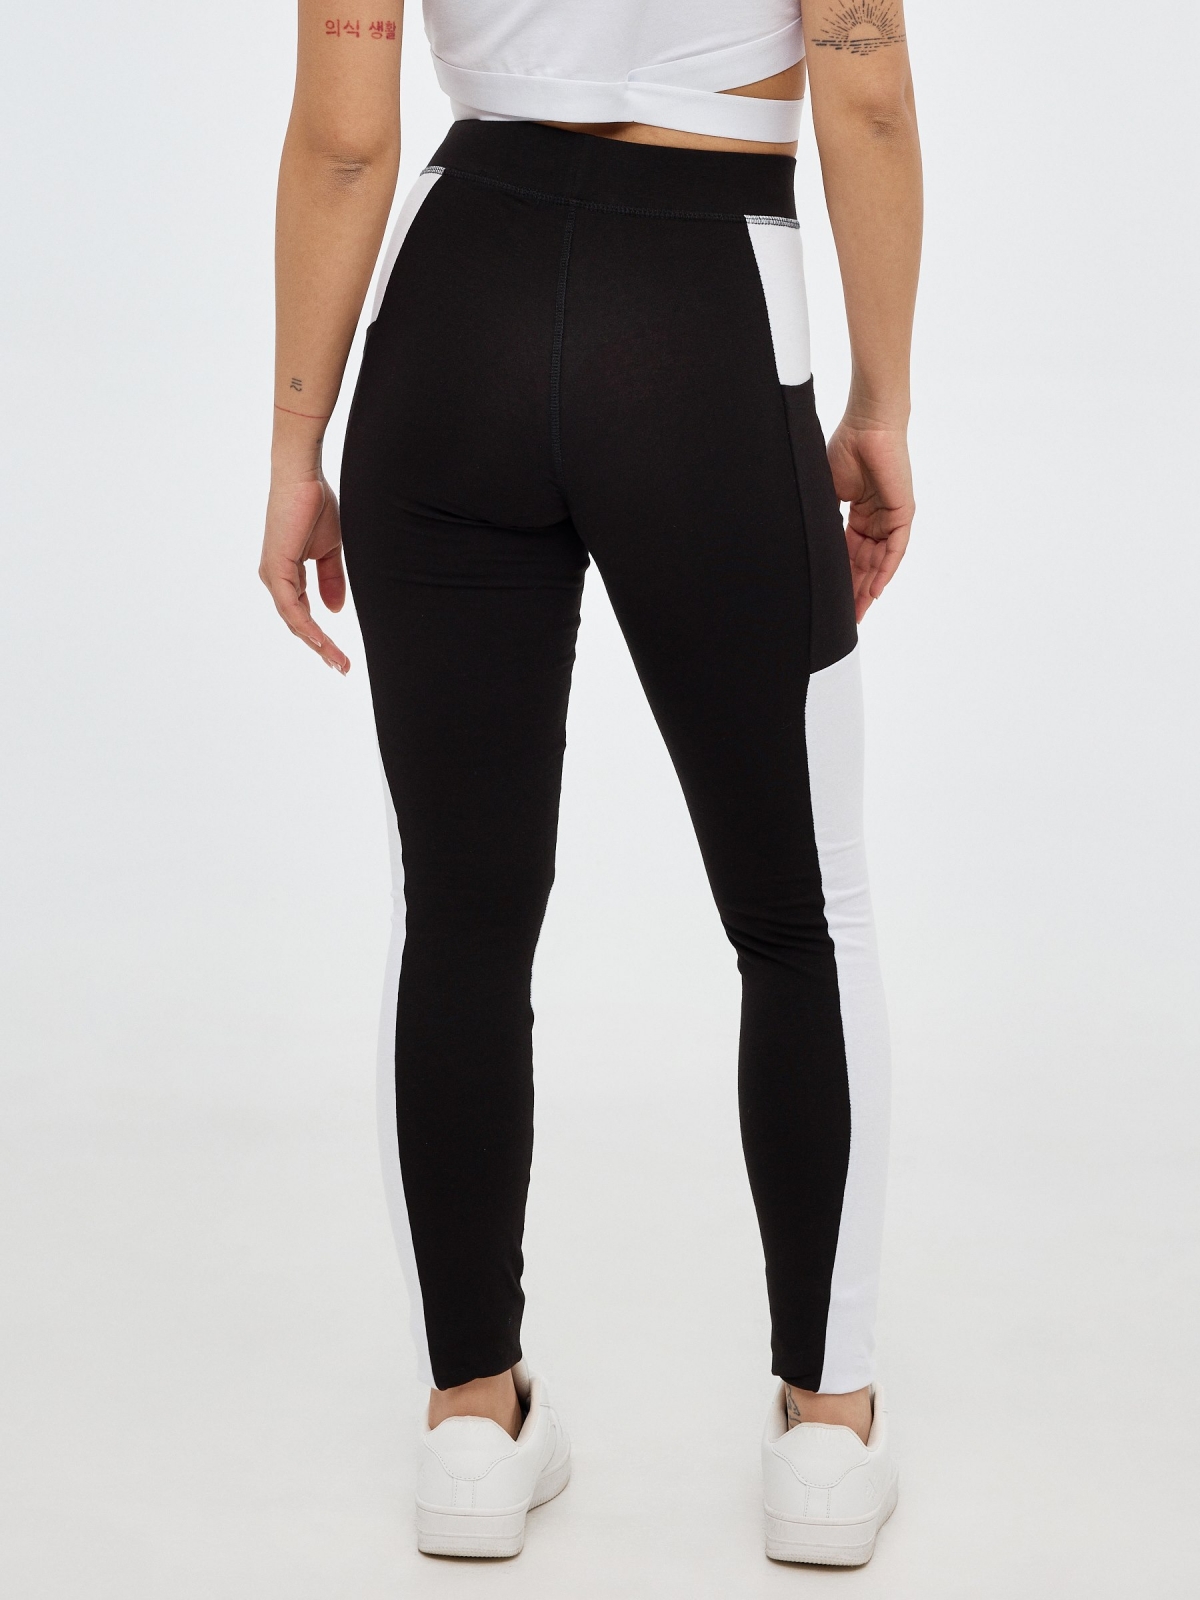 Legging with pockets black middle back view